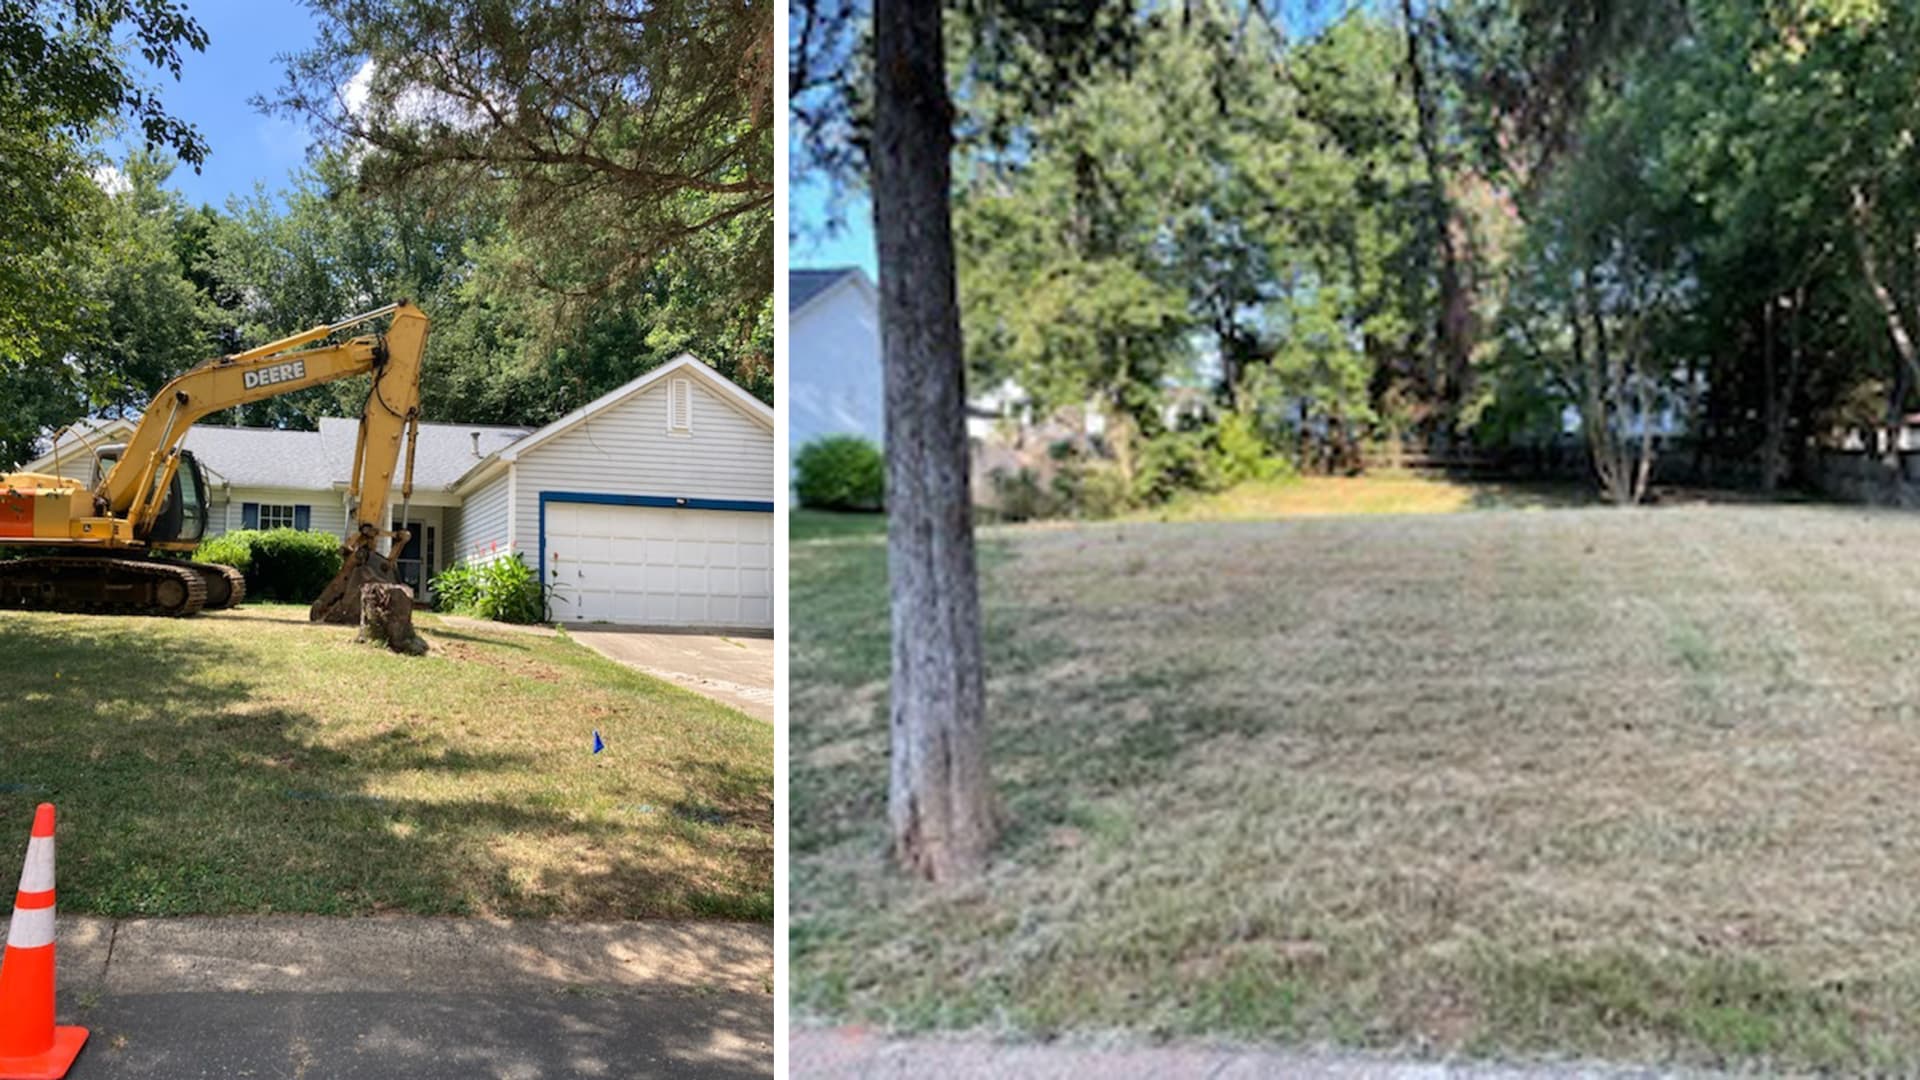 The image on the left shows the former home of Andrea Jones before it was demolished following a floodplain buyout. The image on the right is how the land looks now.